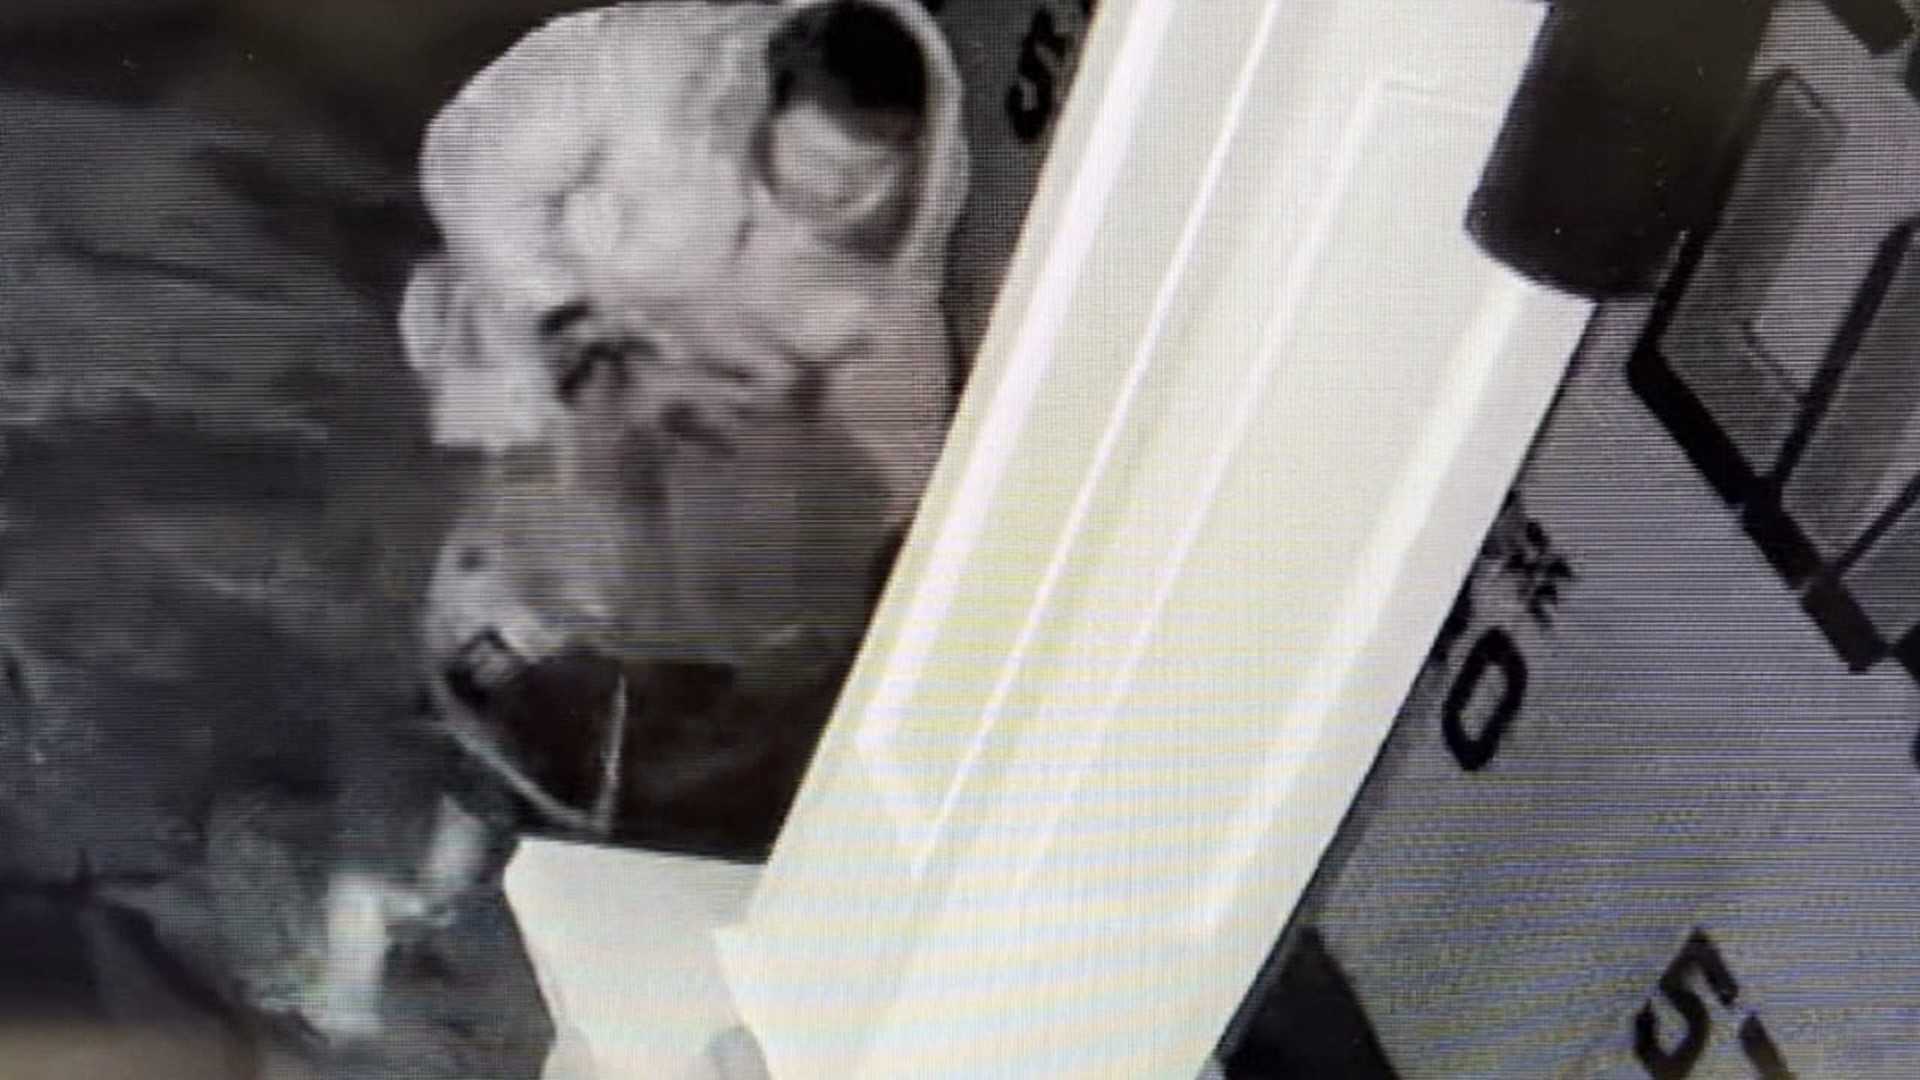 Surveillance video shows the suspect stealing a catalytic converter from a delivery truck.